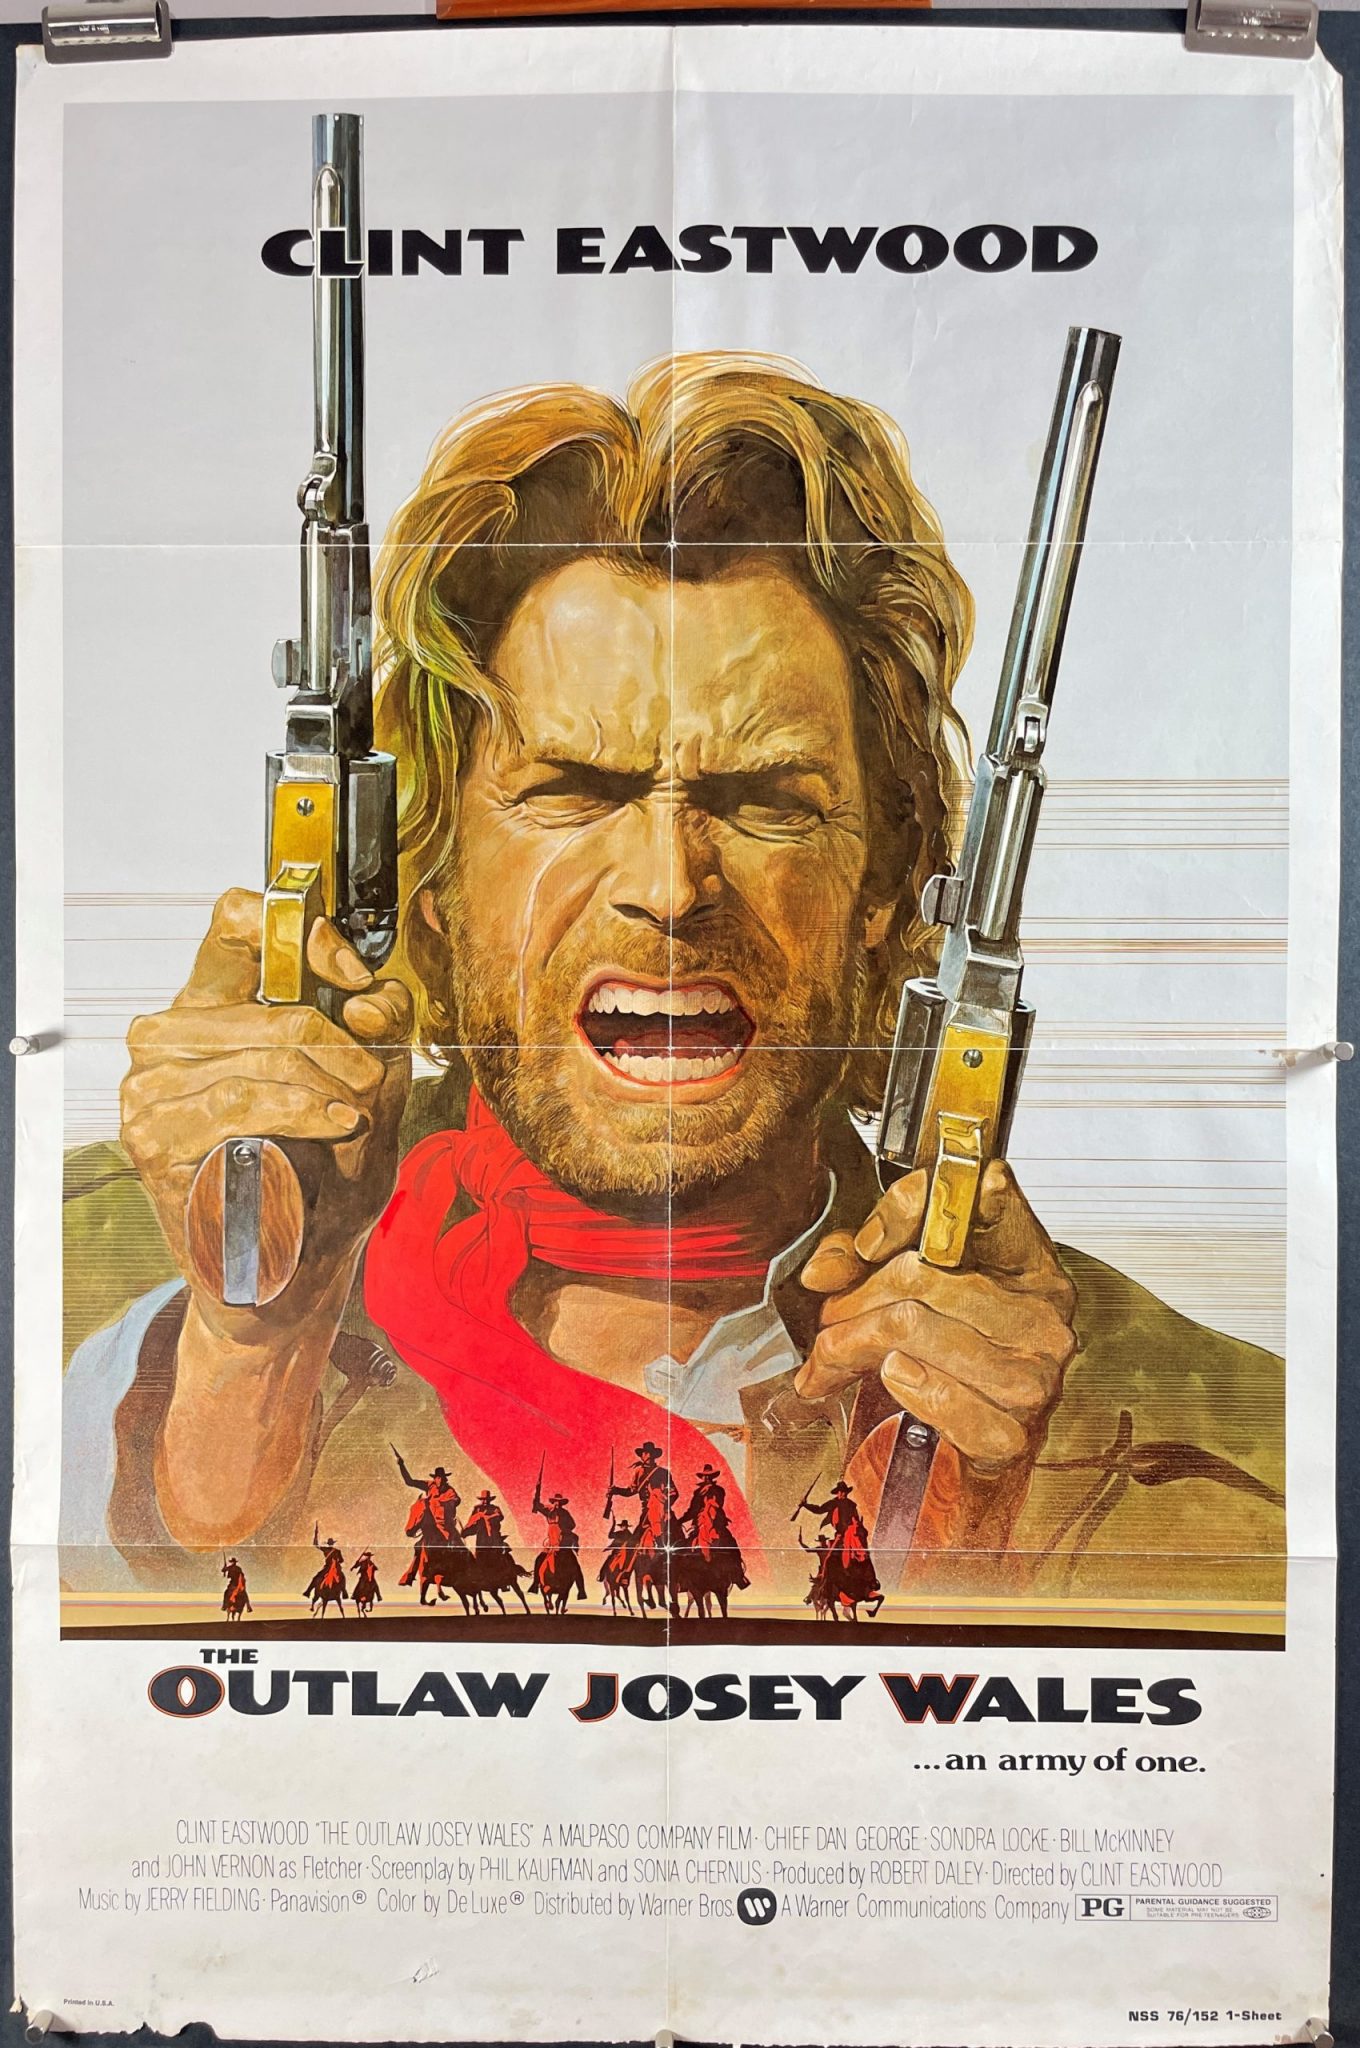 OUTLAW JOSEY WALES, Original Vintage Clint Eastwood Film Poster